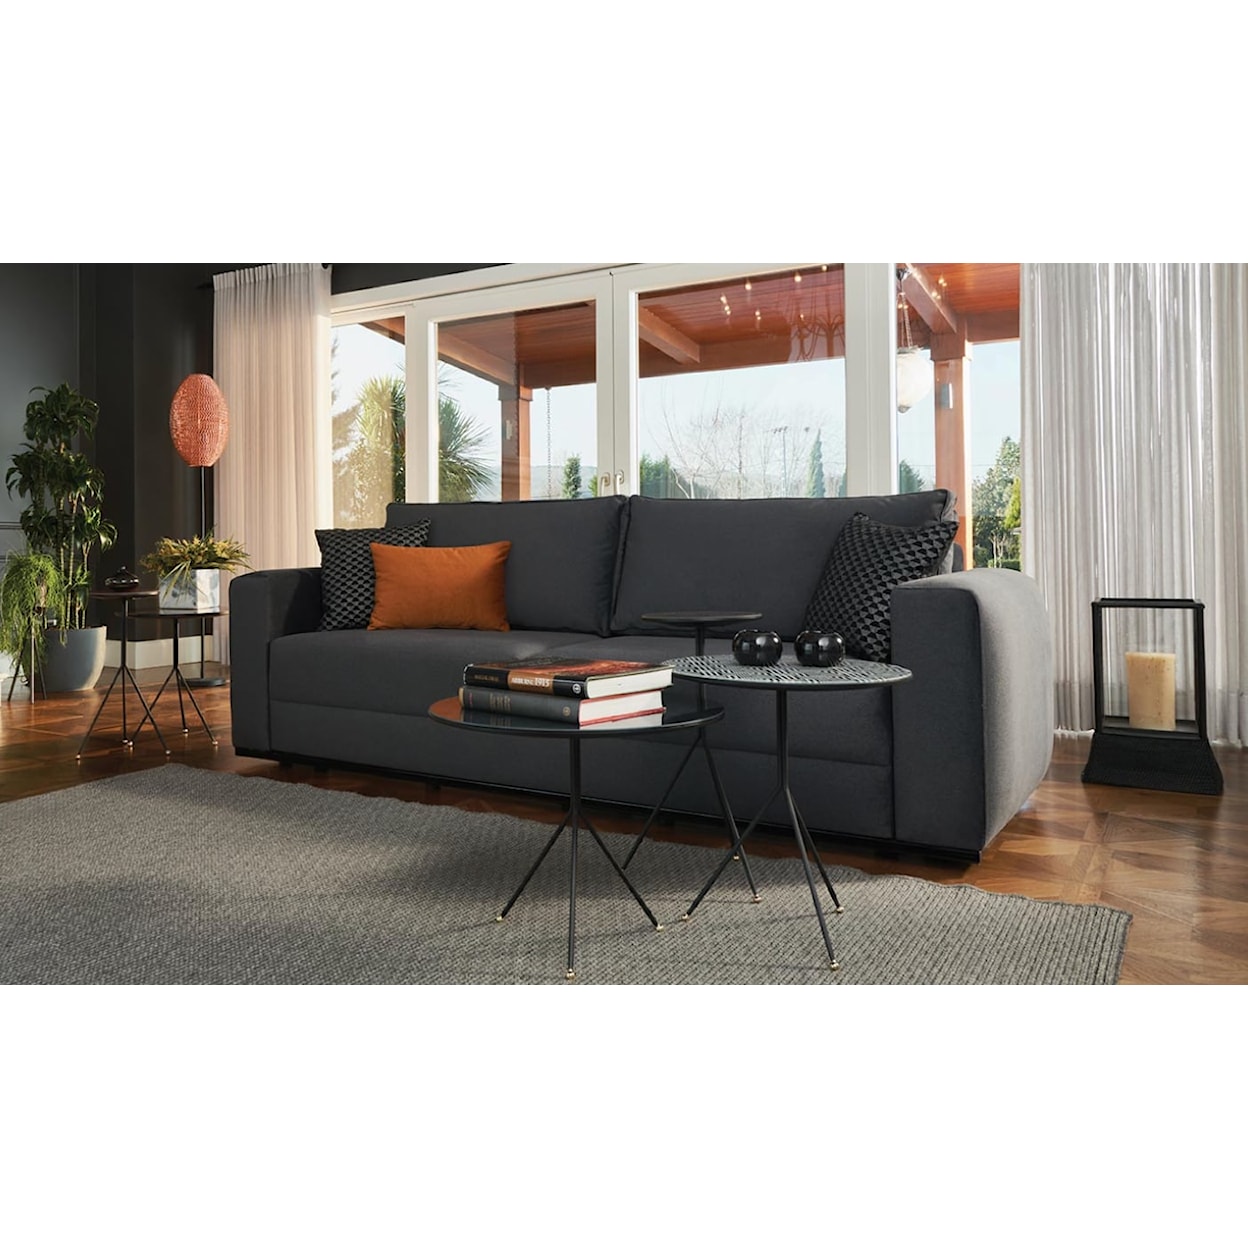 Enza Home Enza Home Collection Carino 3 Seat Sofa Bed